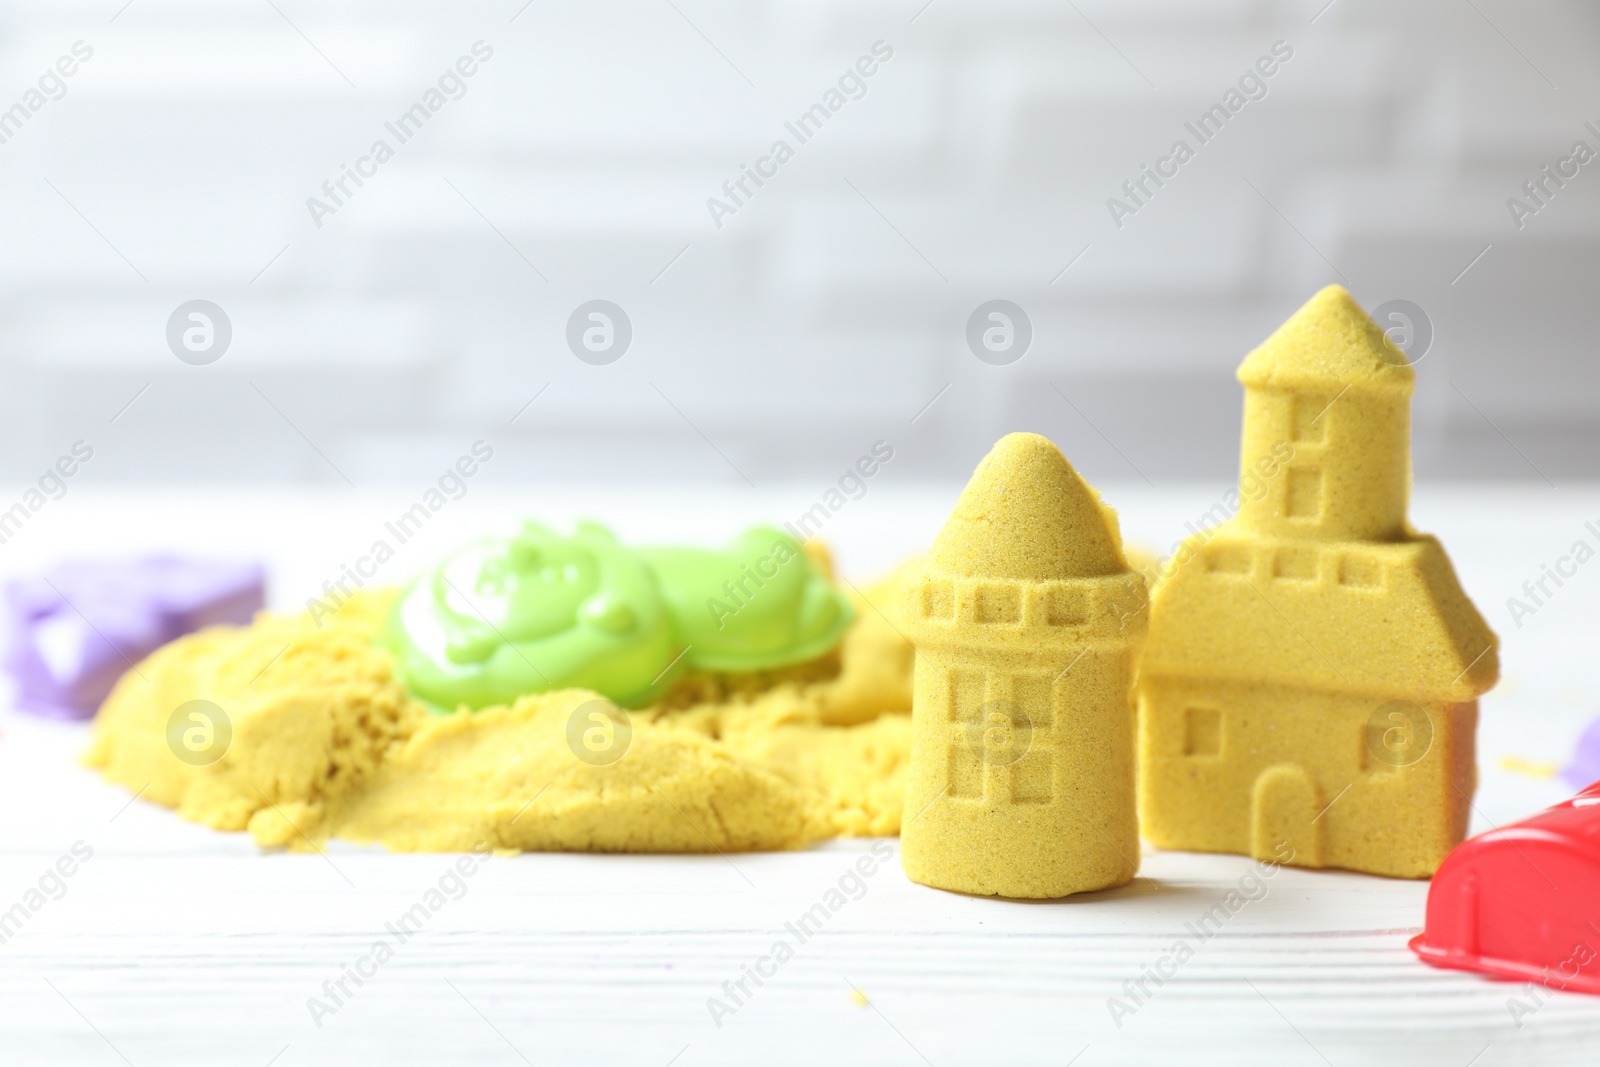 Photo of Castle figures made of yellow kinetic sand and plastic toys on white wooden table, closeup